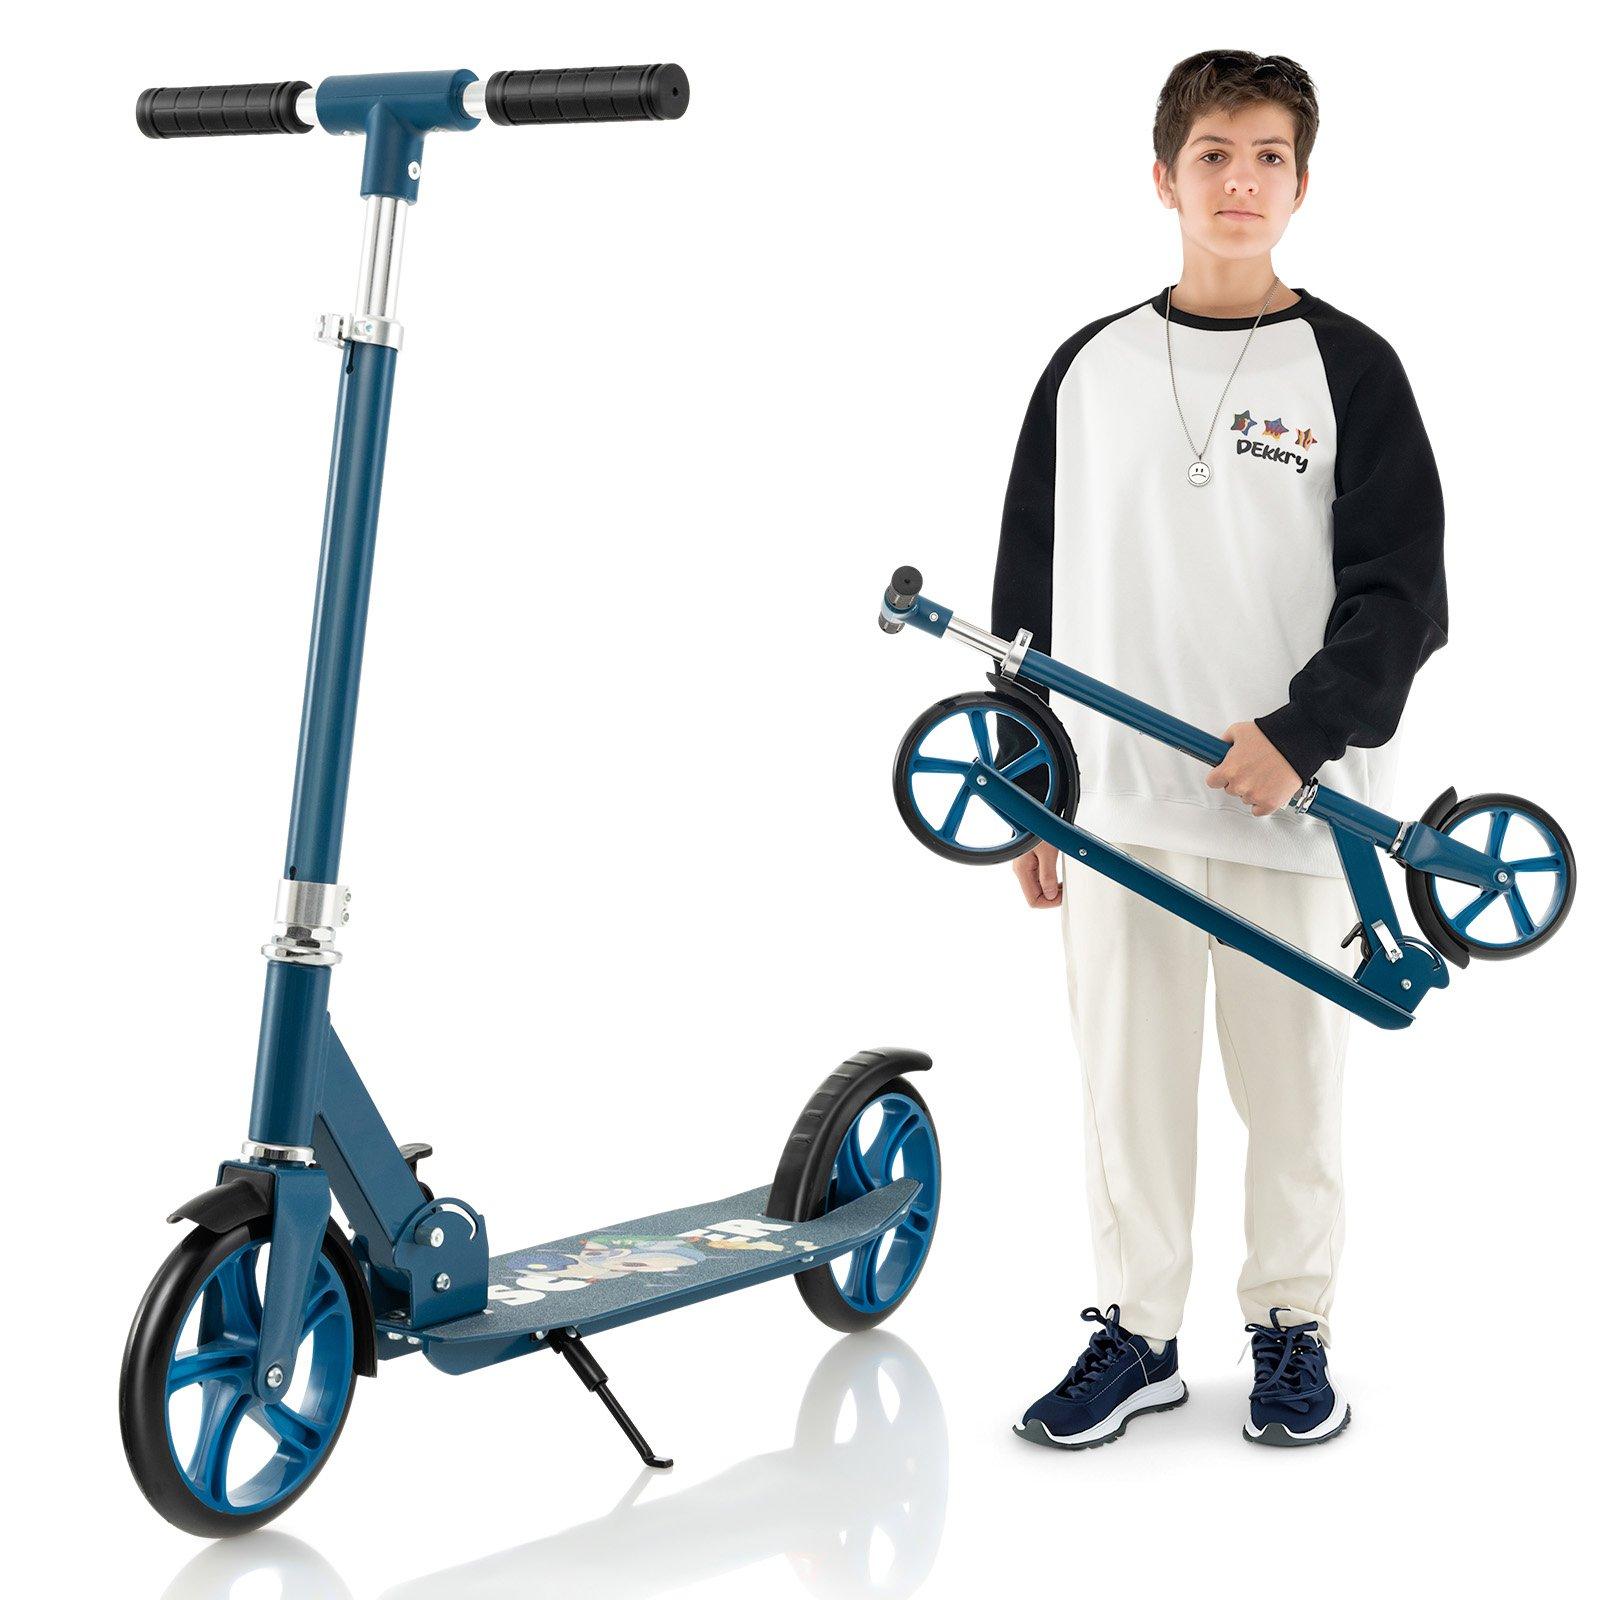 Folding Kick Scooter for Teens & Adults W/ Adjustable Heights & Foot Brake 8 +